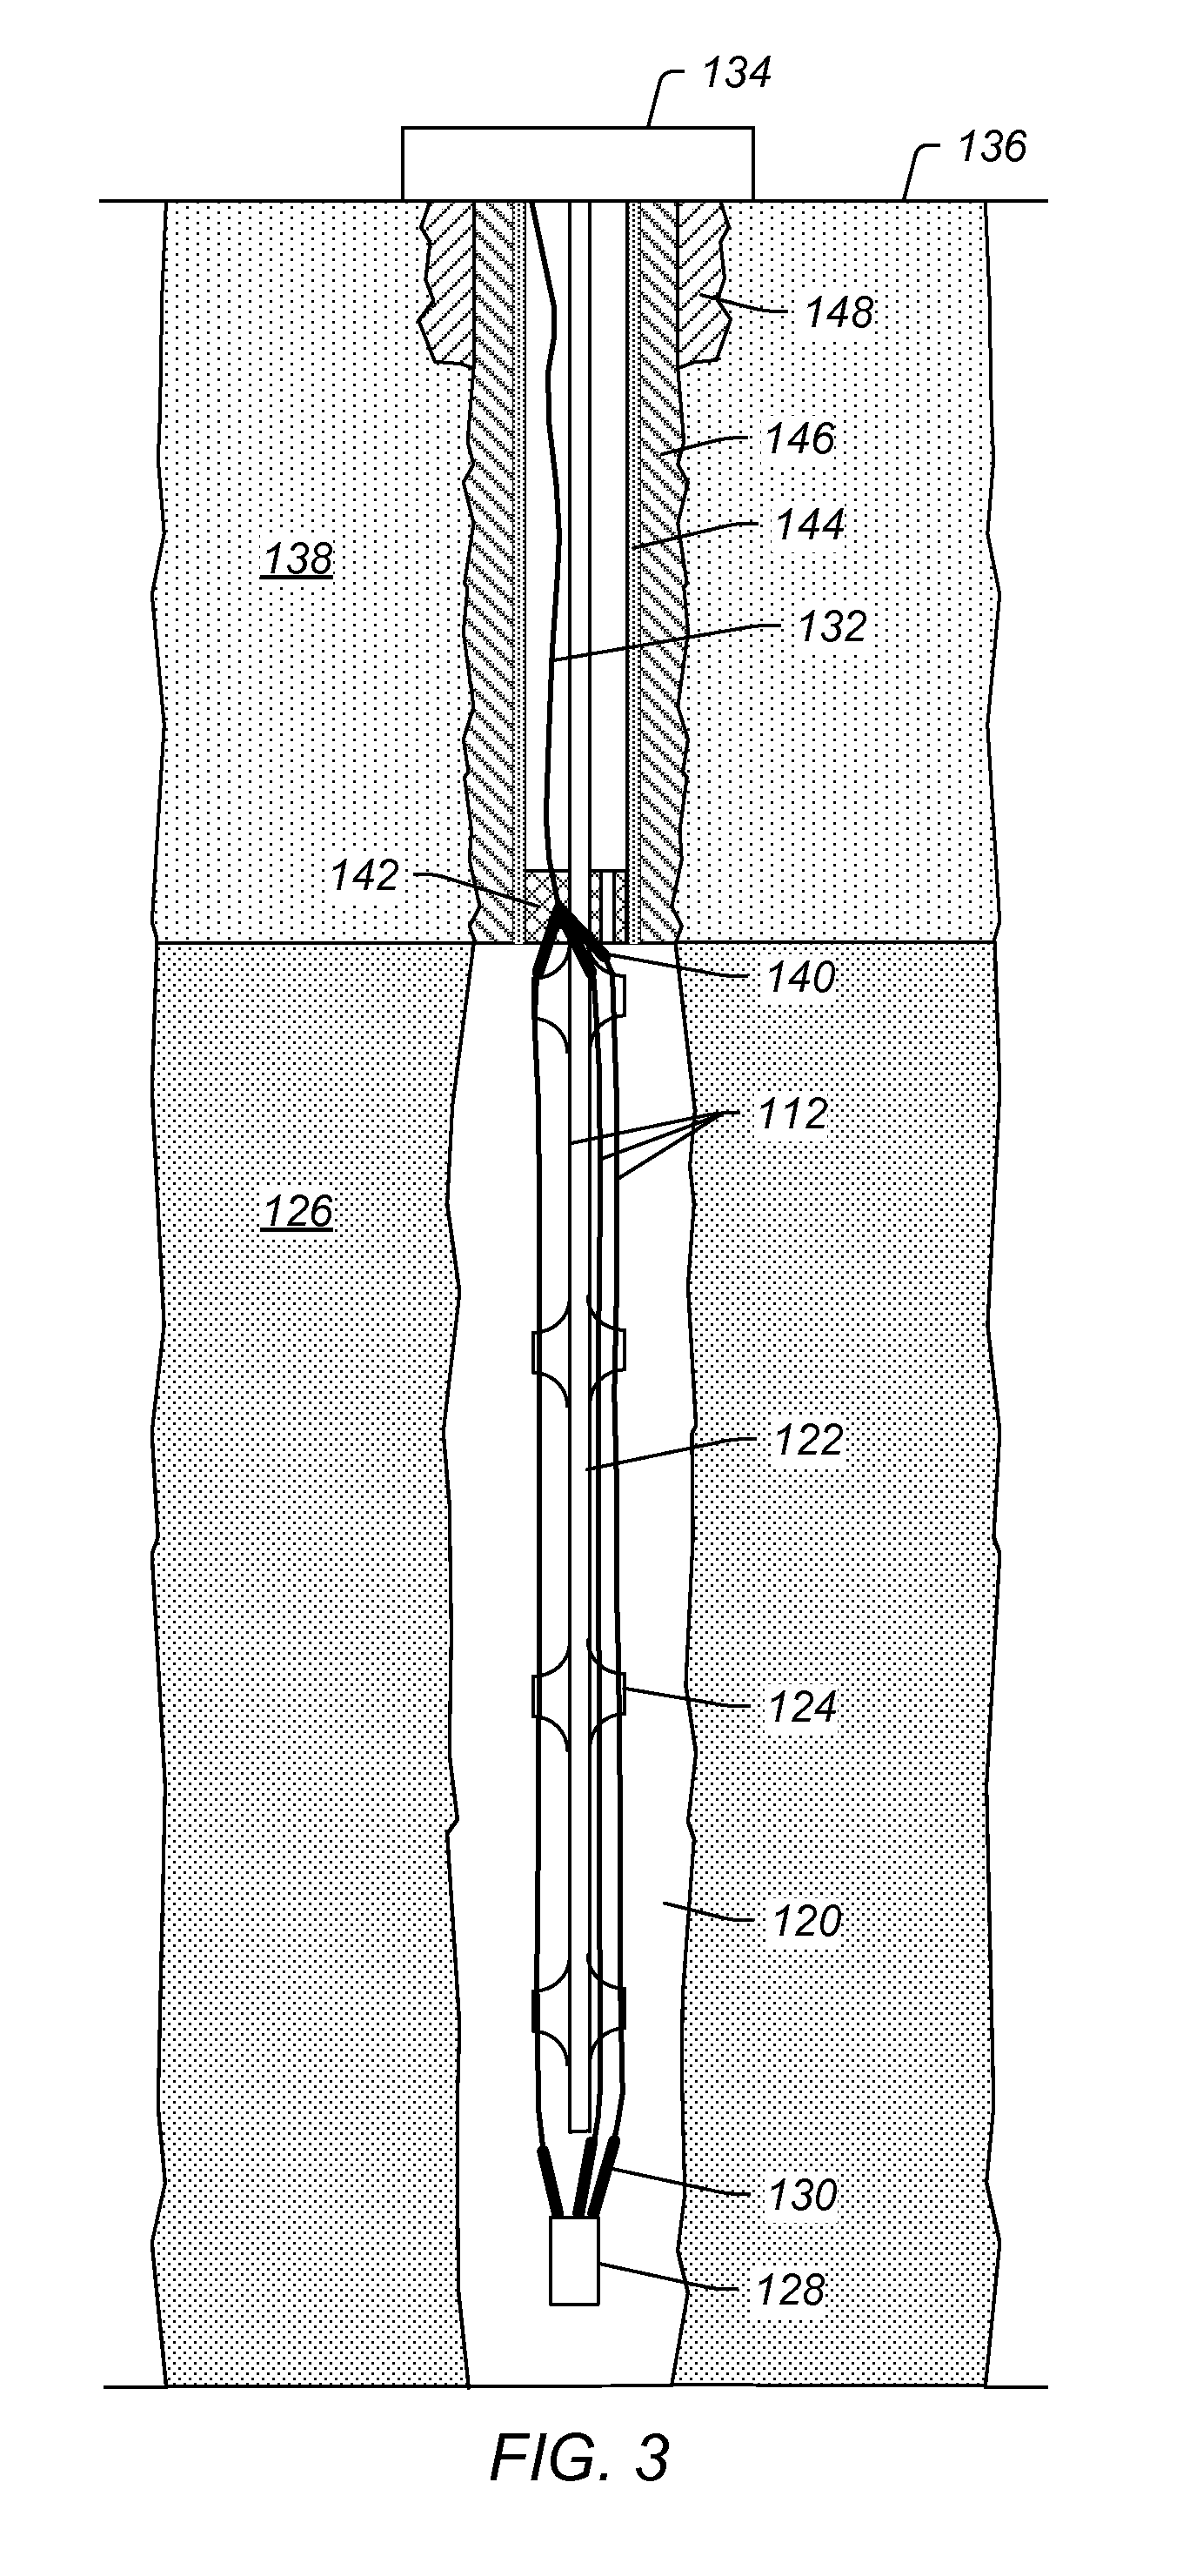 Using dielectric properties of an insulated conductor in a subsurface formation to assess properties of the insulated conductor